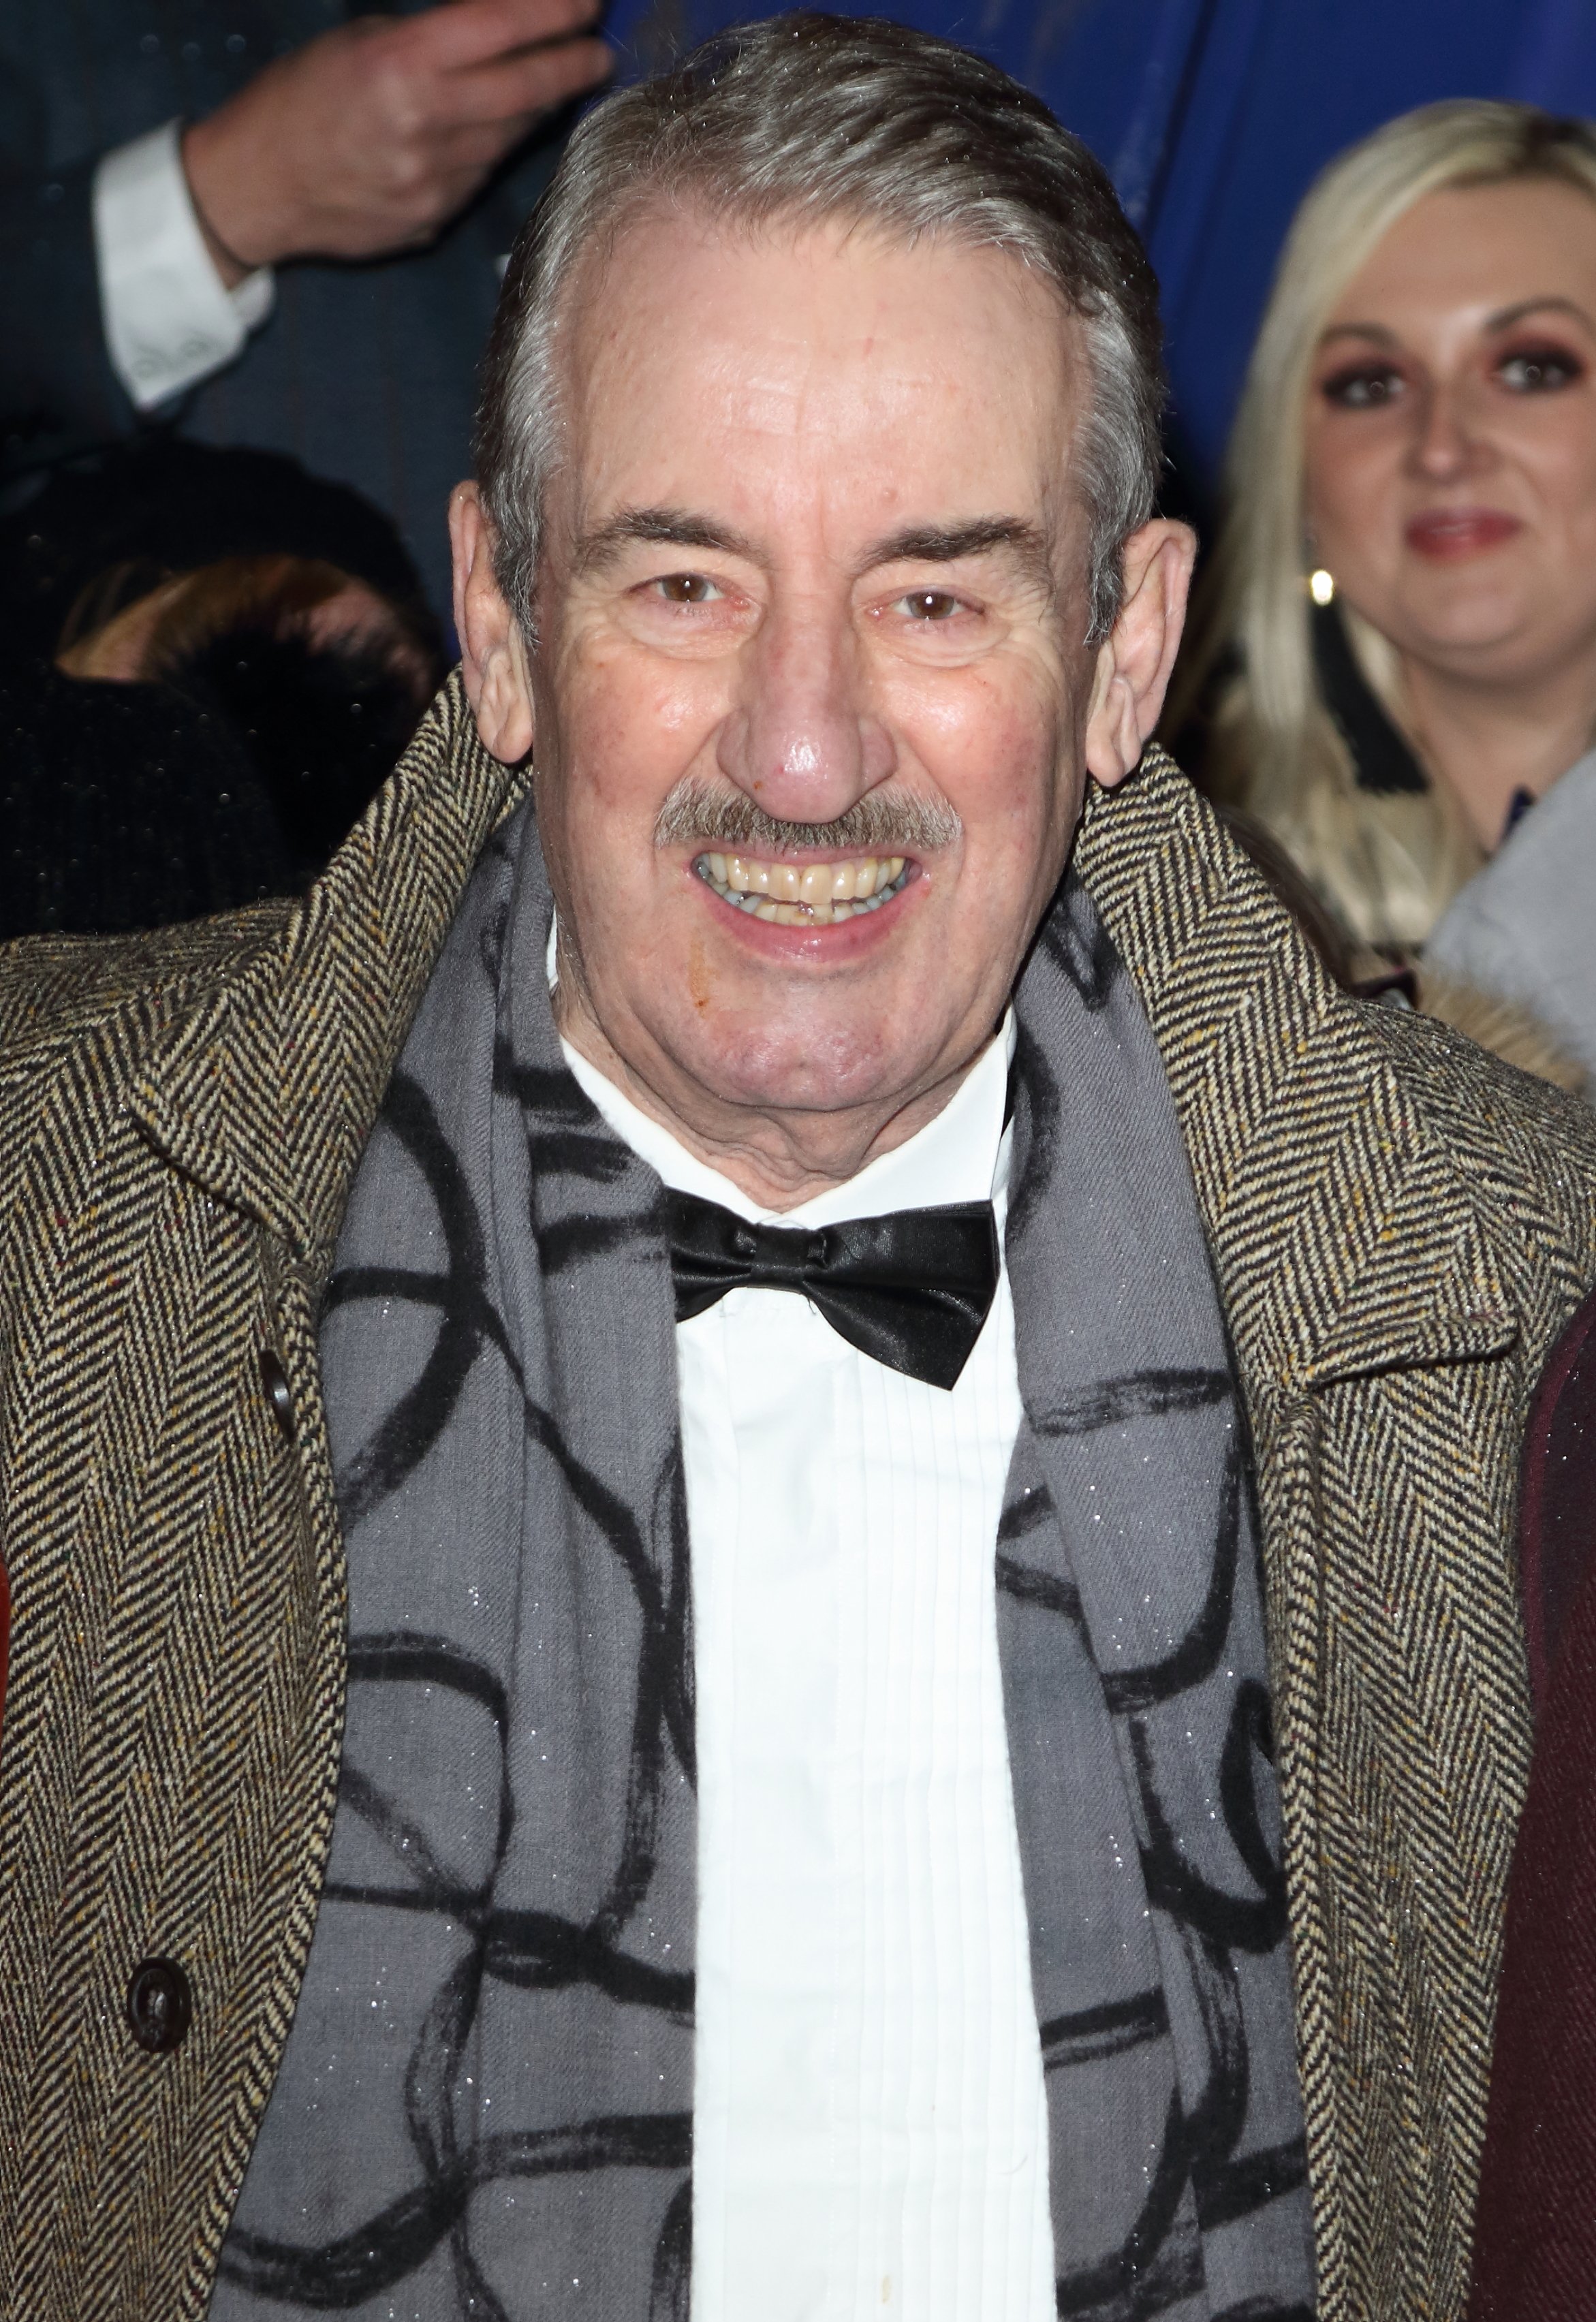 John Challis pictured on the red carpet during the National Television Awards, 2019, United Kingdom. | Photo: Getty Images